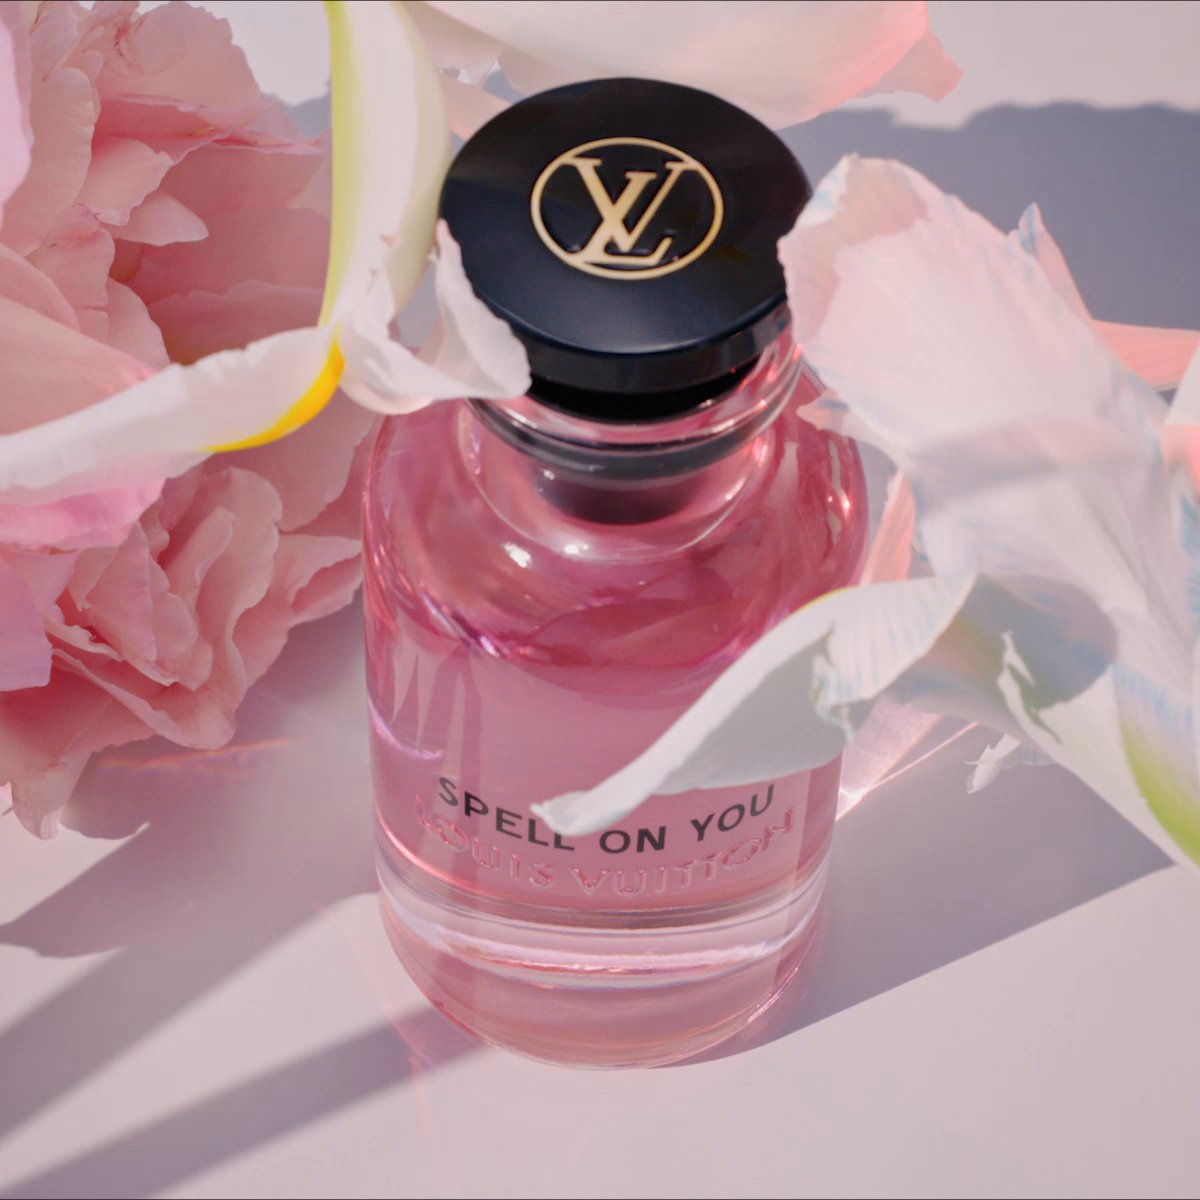 Louis Vuitton on X: Introducing Spell on You. #LouisVuitton